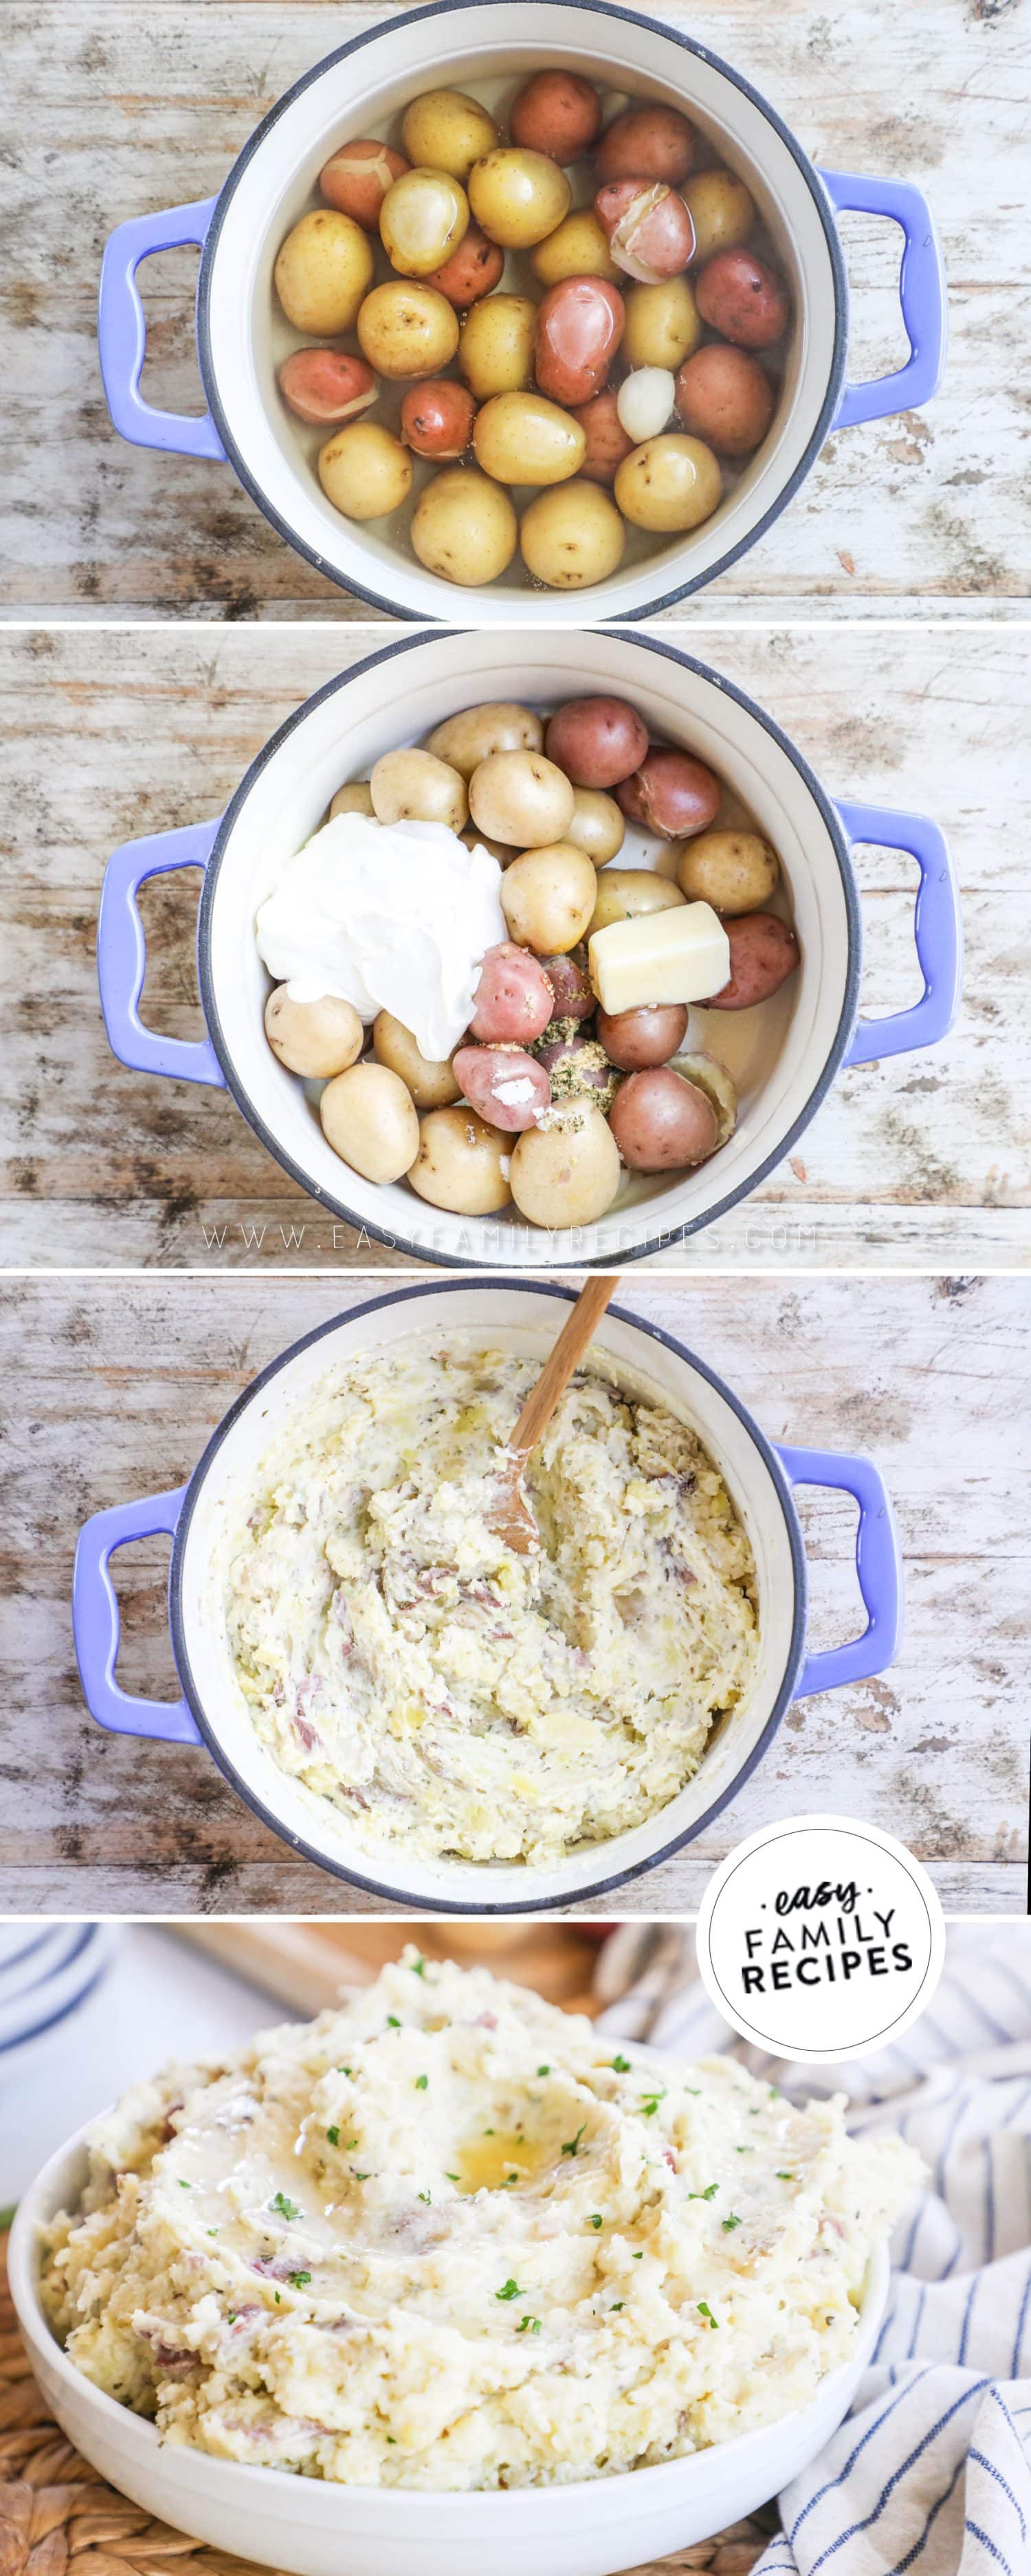 how to make garlic mashed potatoes 1)boil the potatoes, 2)drain and add the other ingredients, 3)mash, 4)serve!